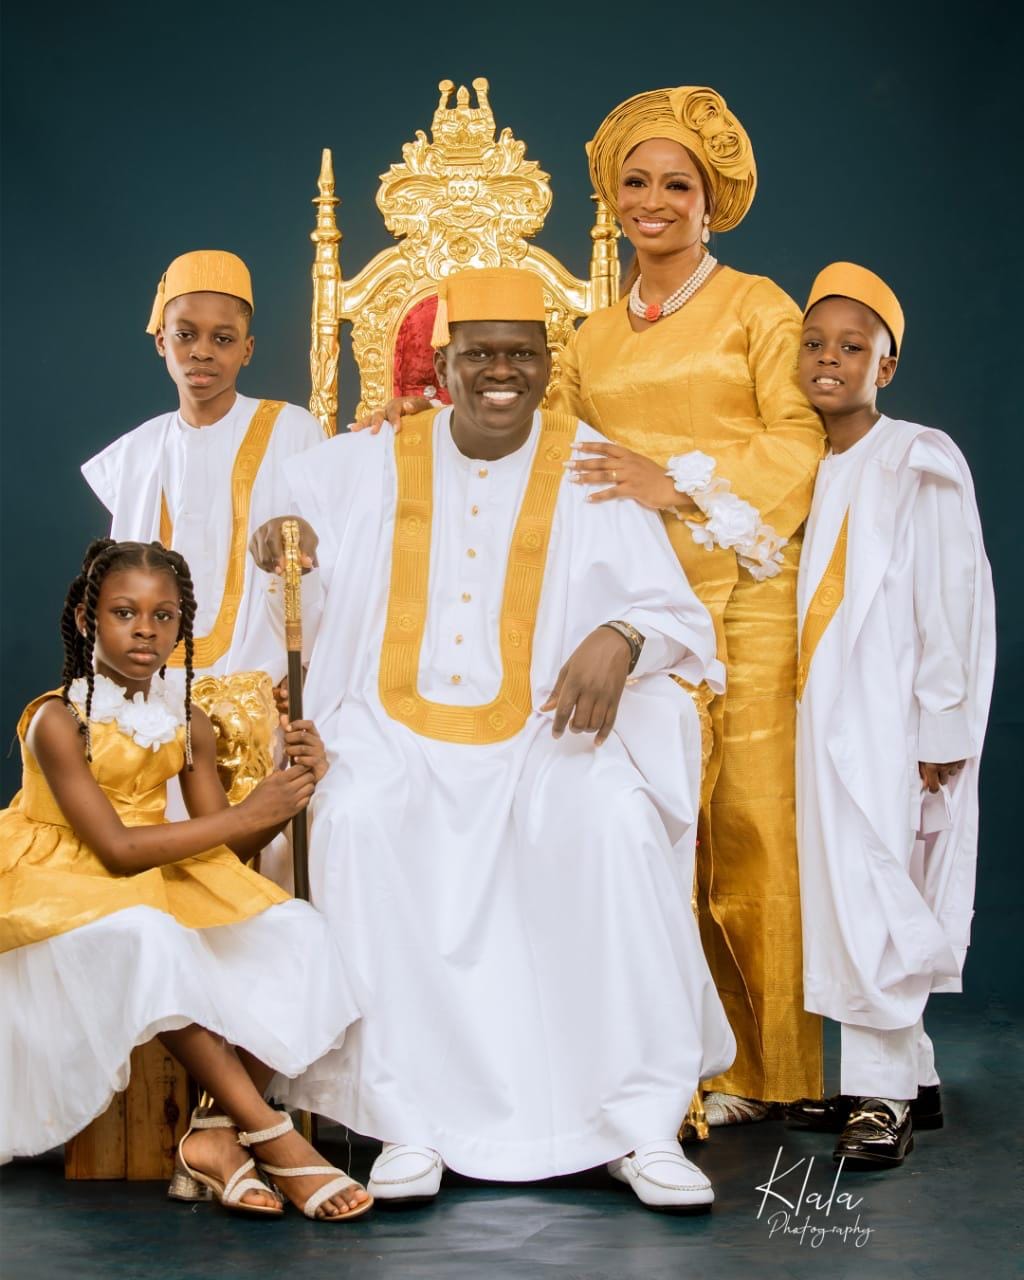 Dr. Stephen Akintayo, his wife and their three kids